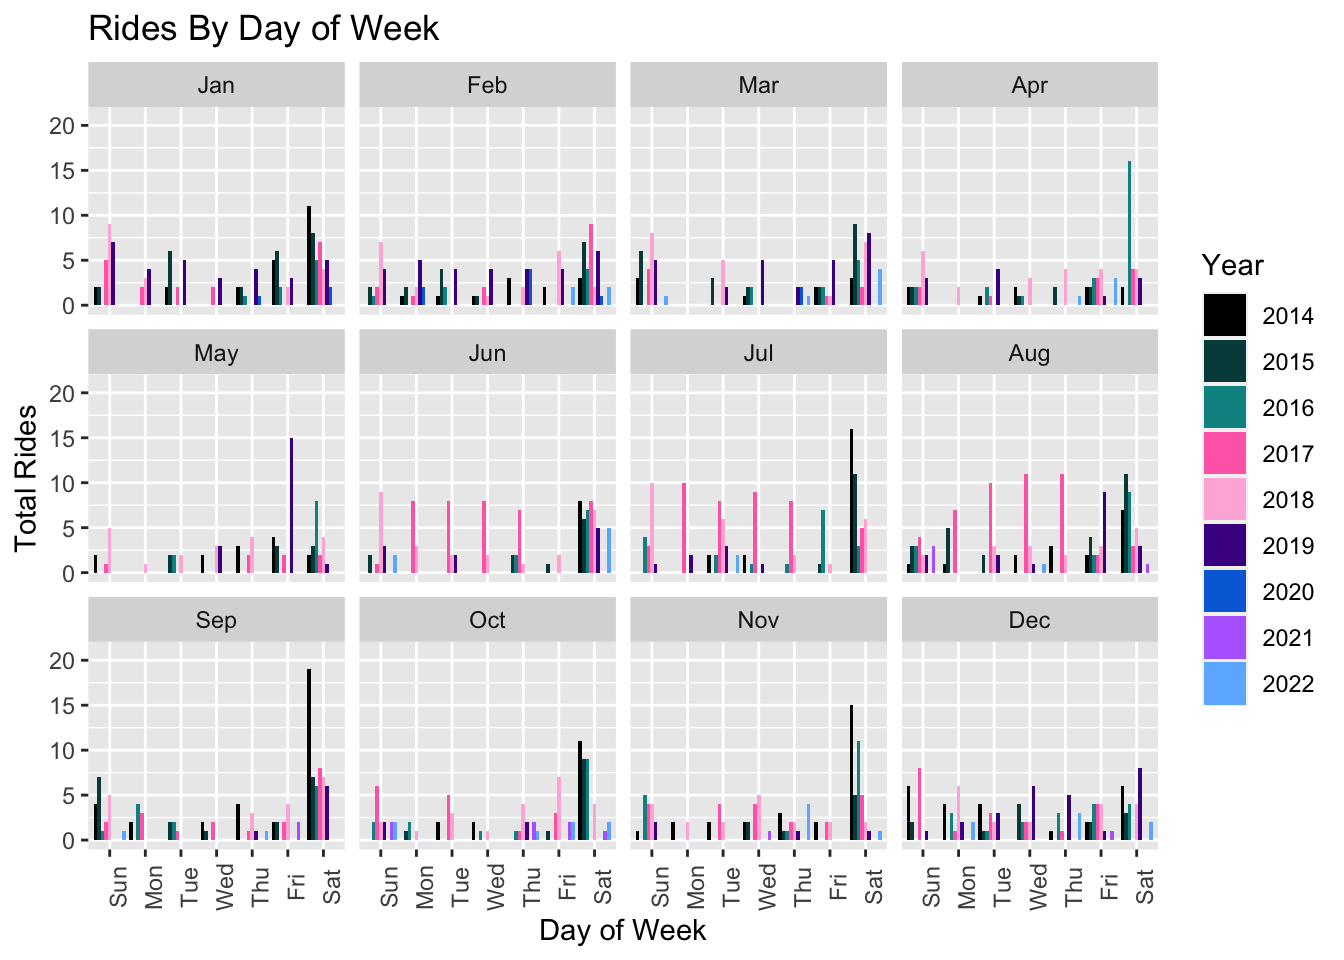 Year-over-year Rides by Day of Week and Month